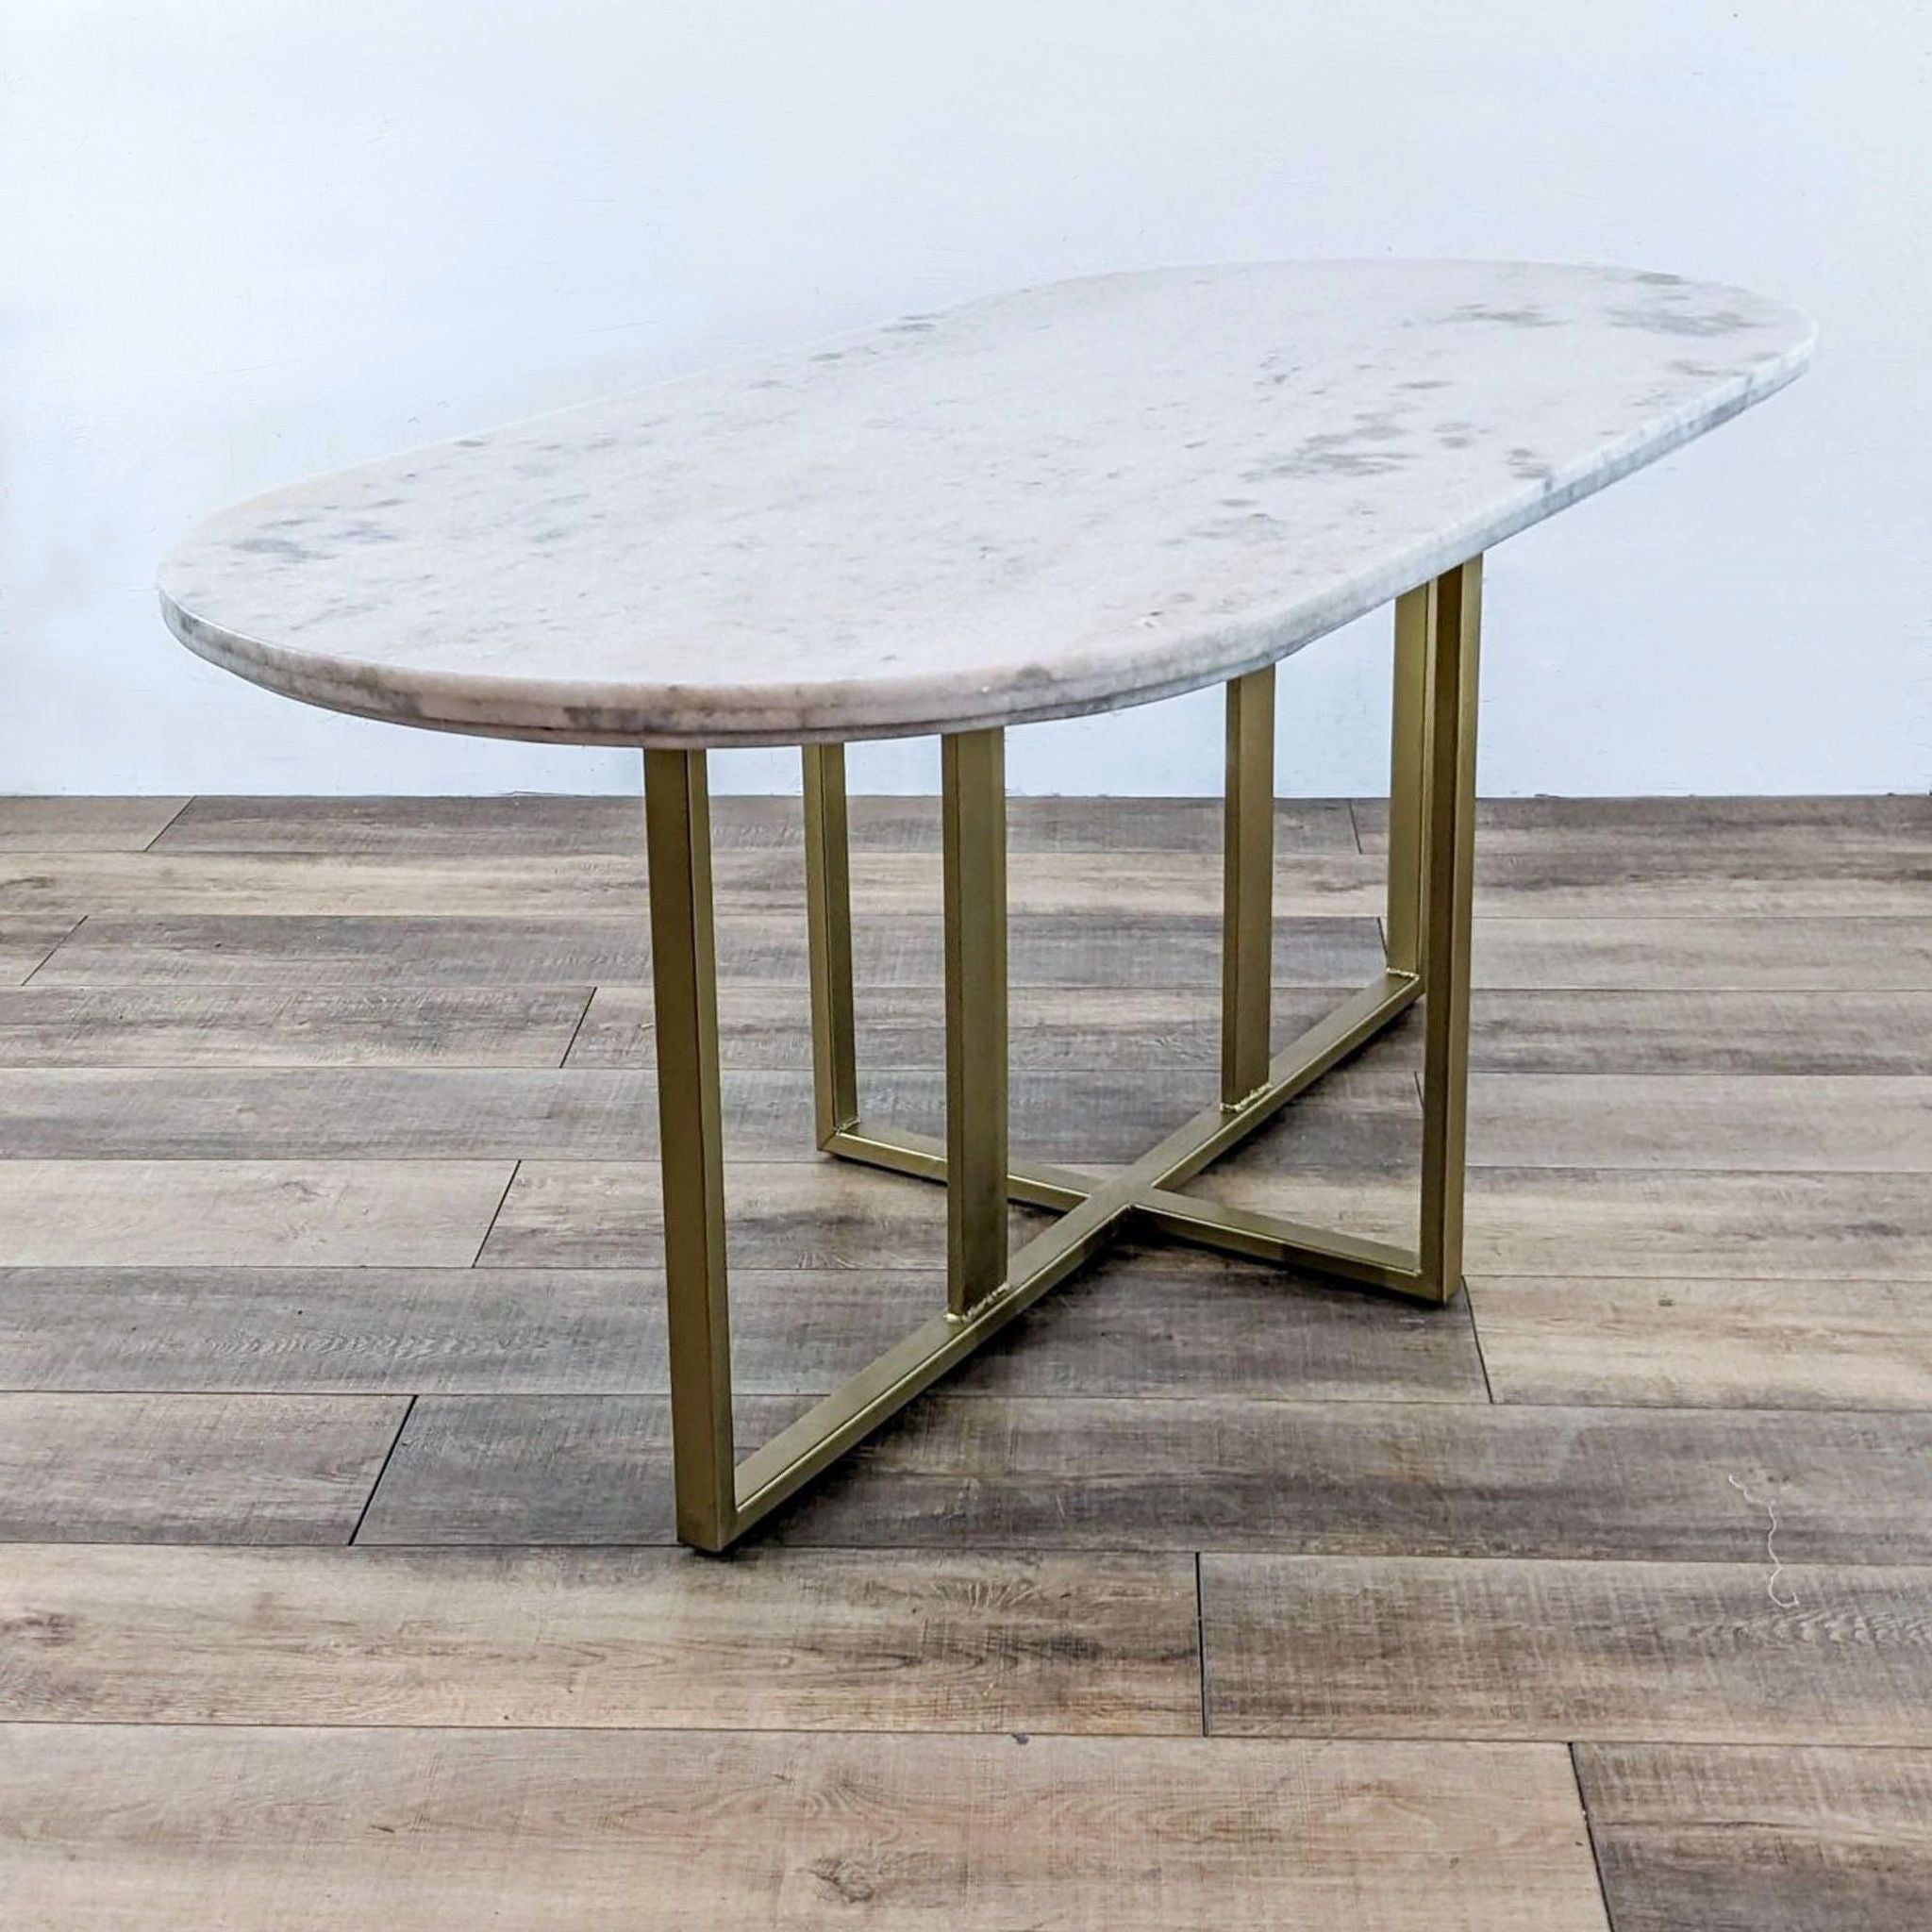 Alt text 2: Frontal angle of a Four Hands Dylia table, displaying its white marble surface and clean-lined brass base on a wood-patterned floor.